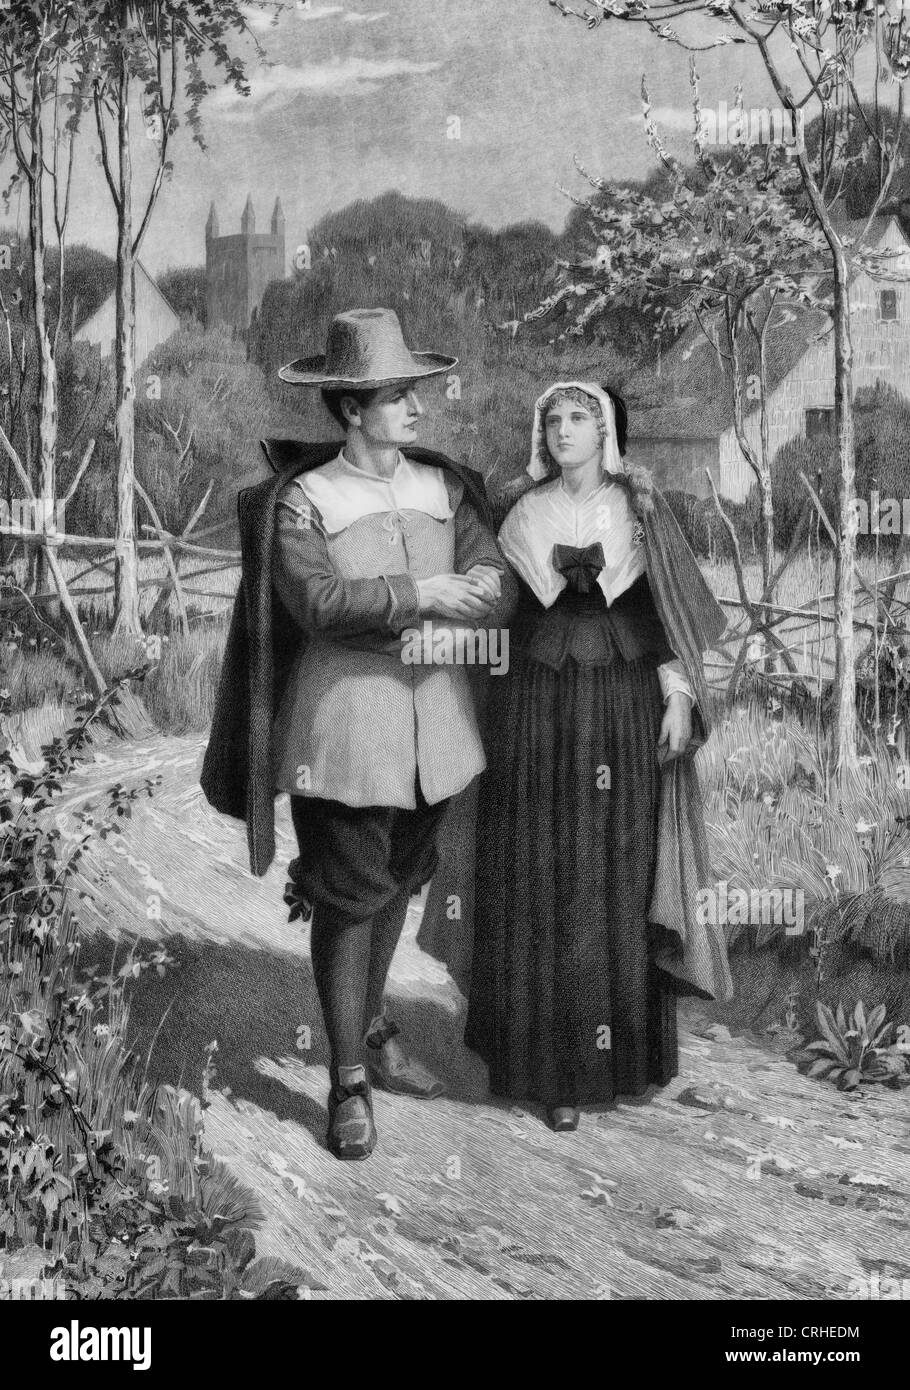 Betrothed - Puritan Couple walk hand in hand Stock Photo